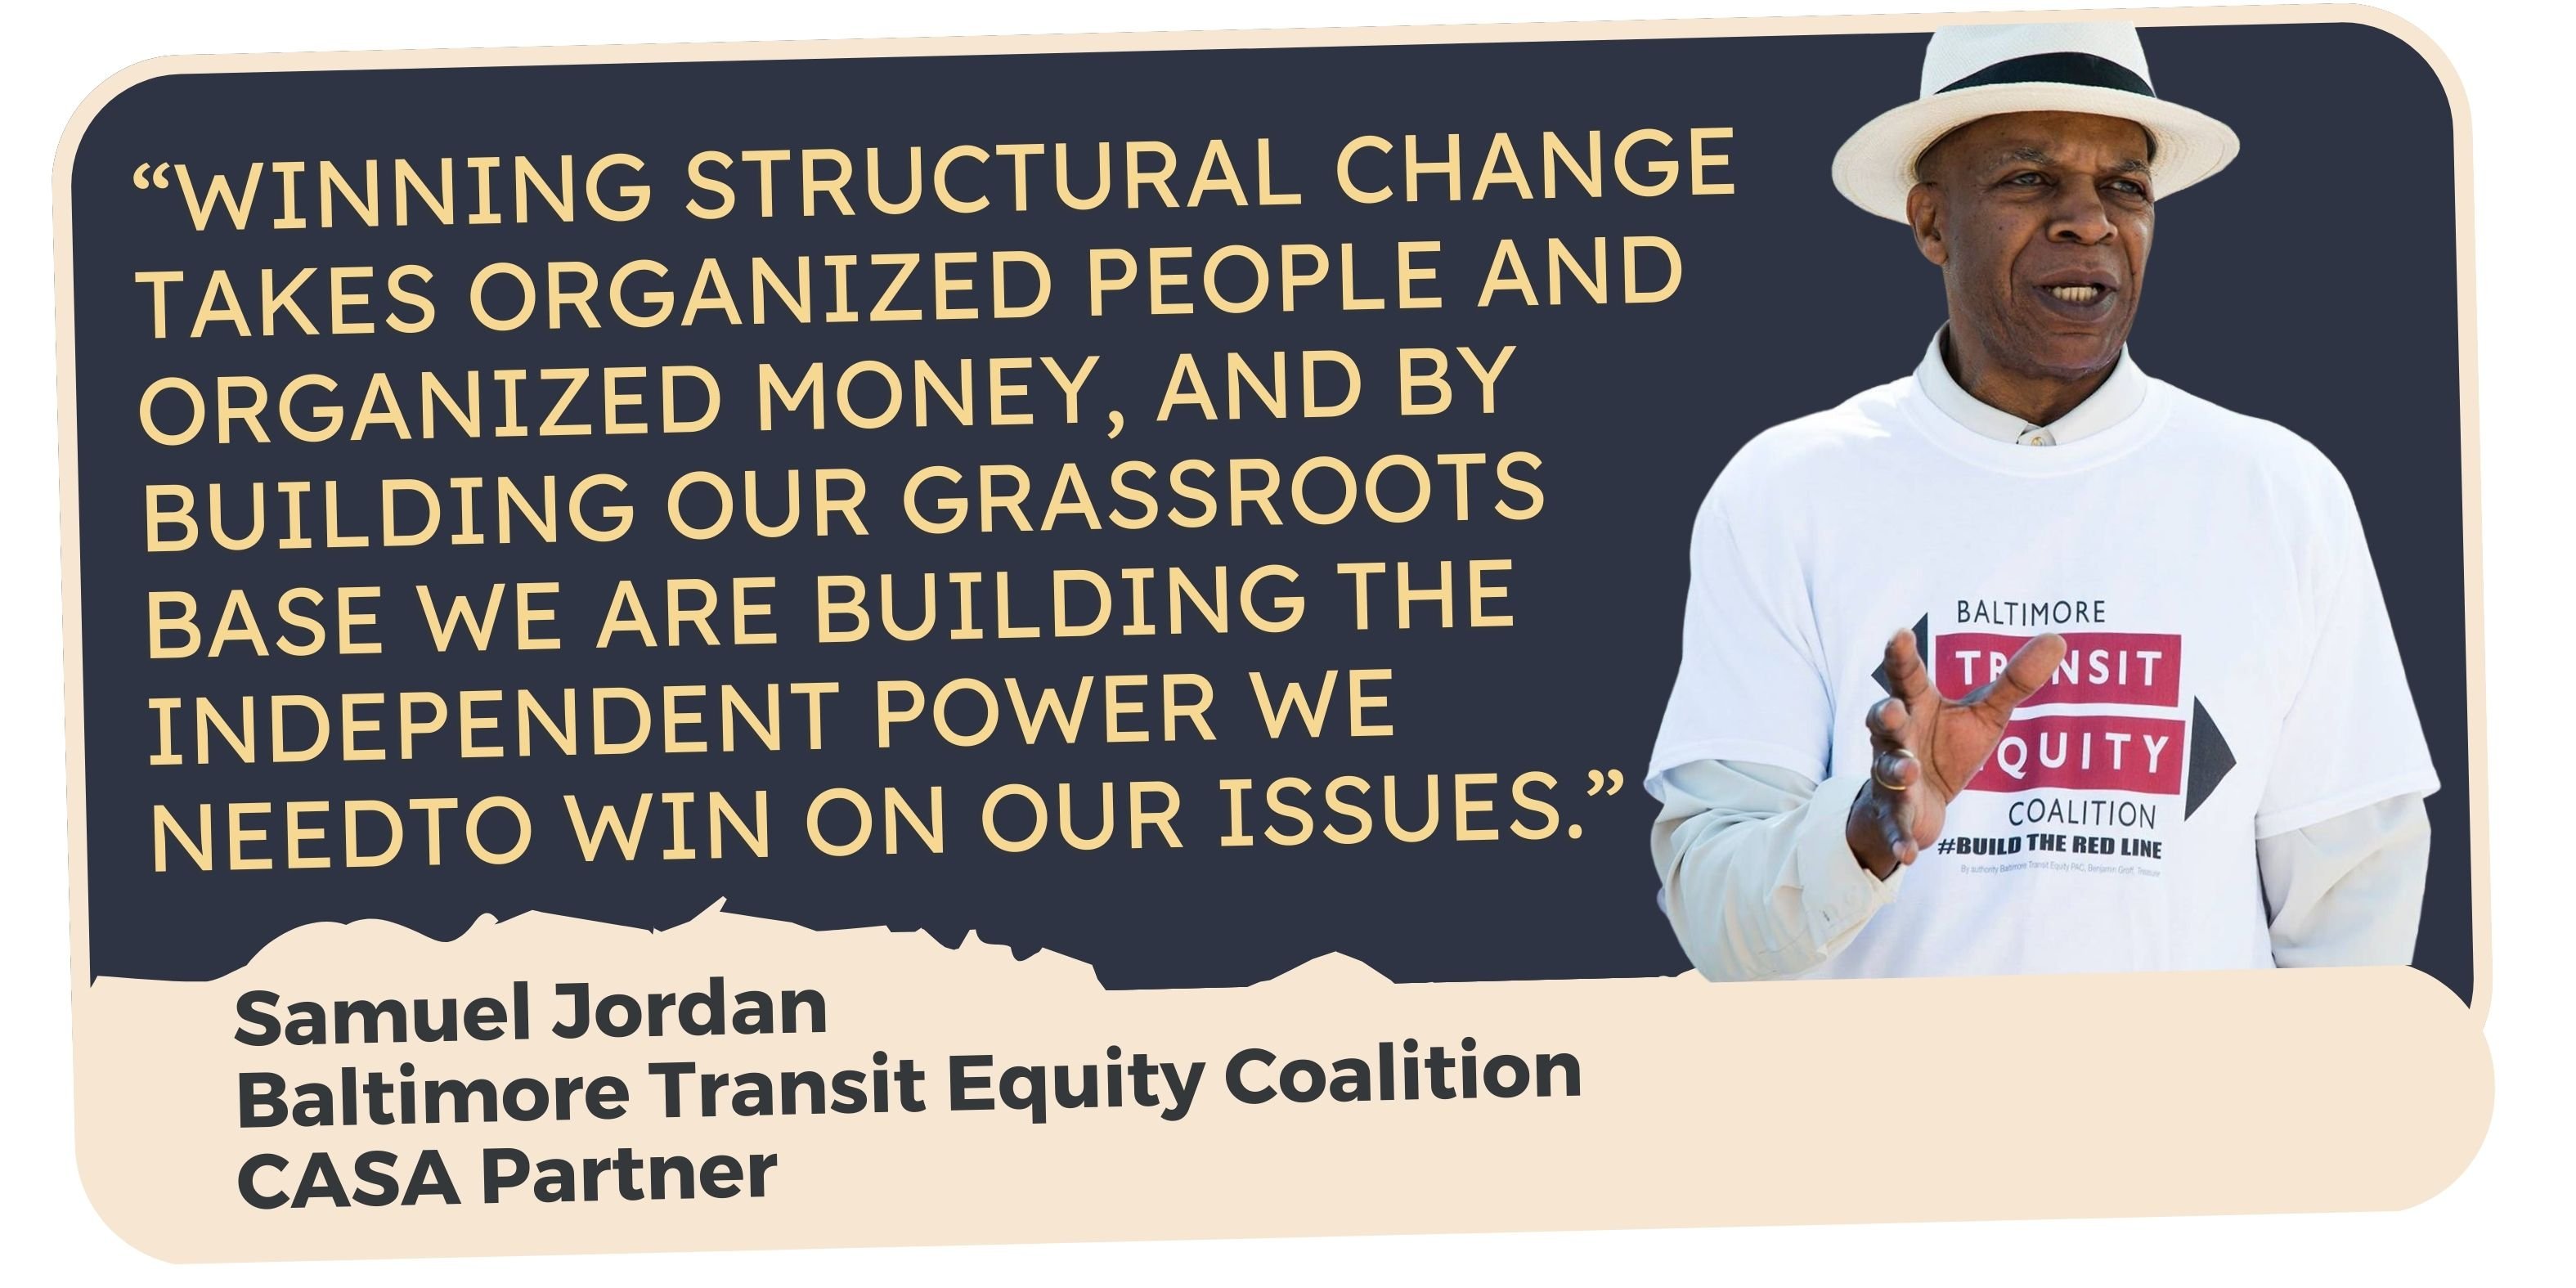 Image of a quote from Samuel Jordan at the Baltimore Transit Equity Coalition about organized money and grassroots building